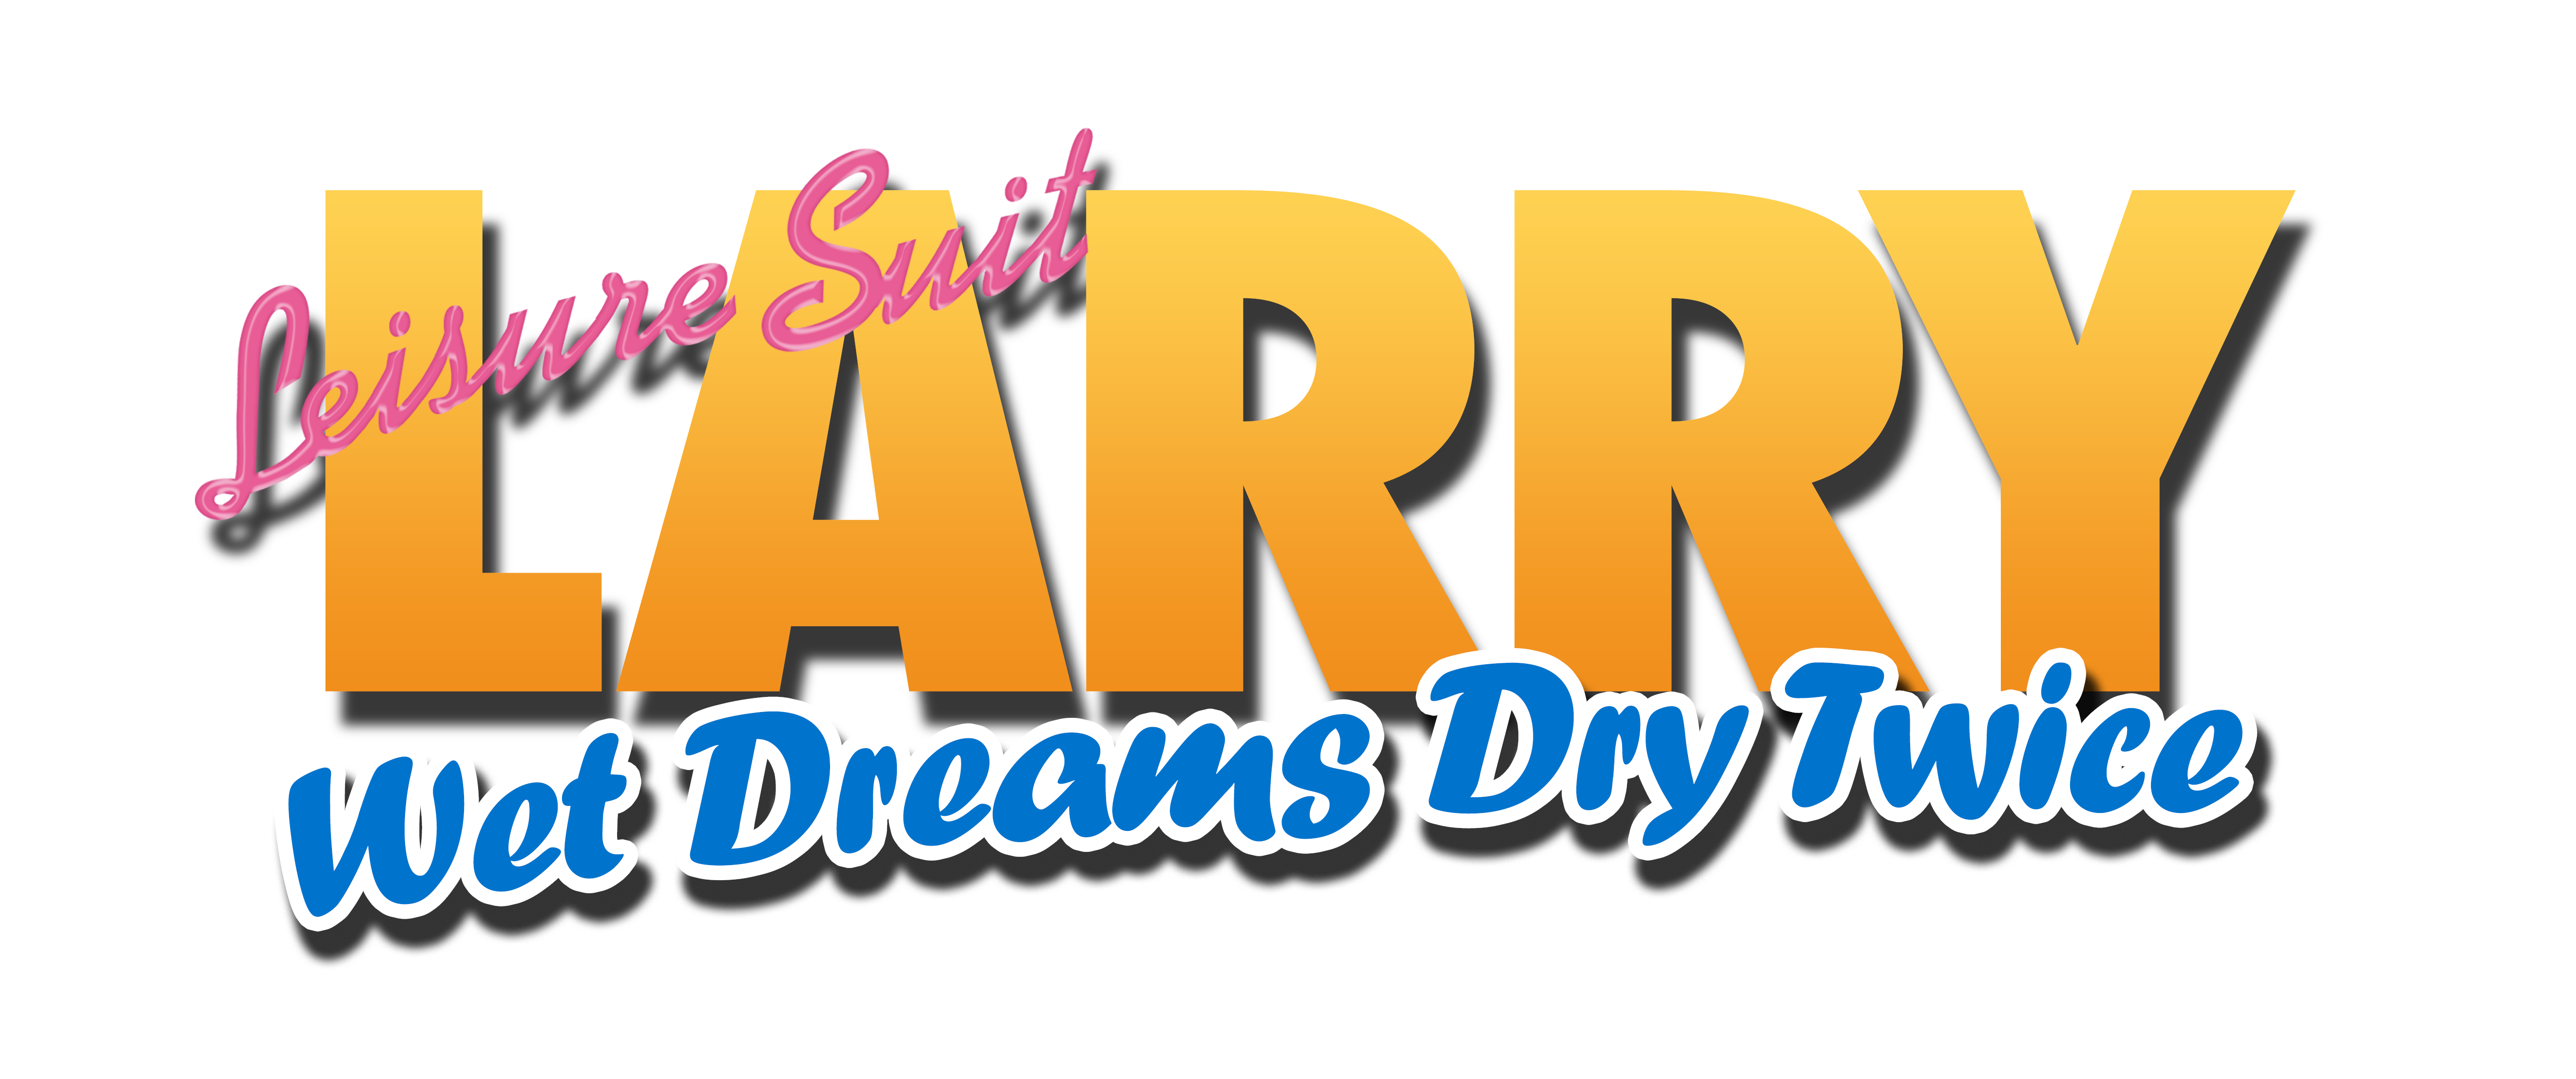 Larry Bares It All in New Video for Leisure Suit Larry – Wet Dreams Dry Twice (PC)